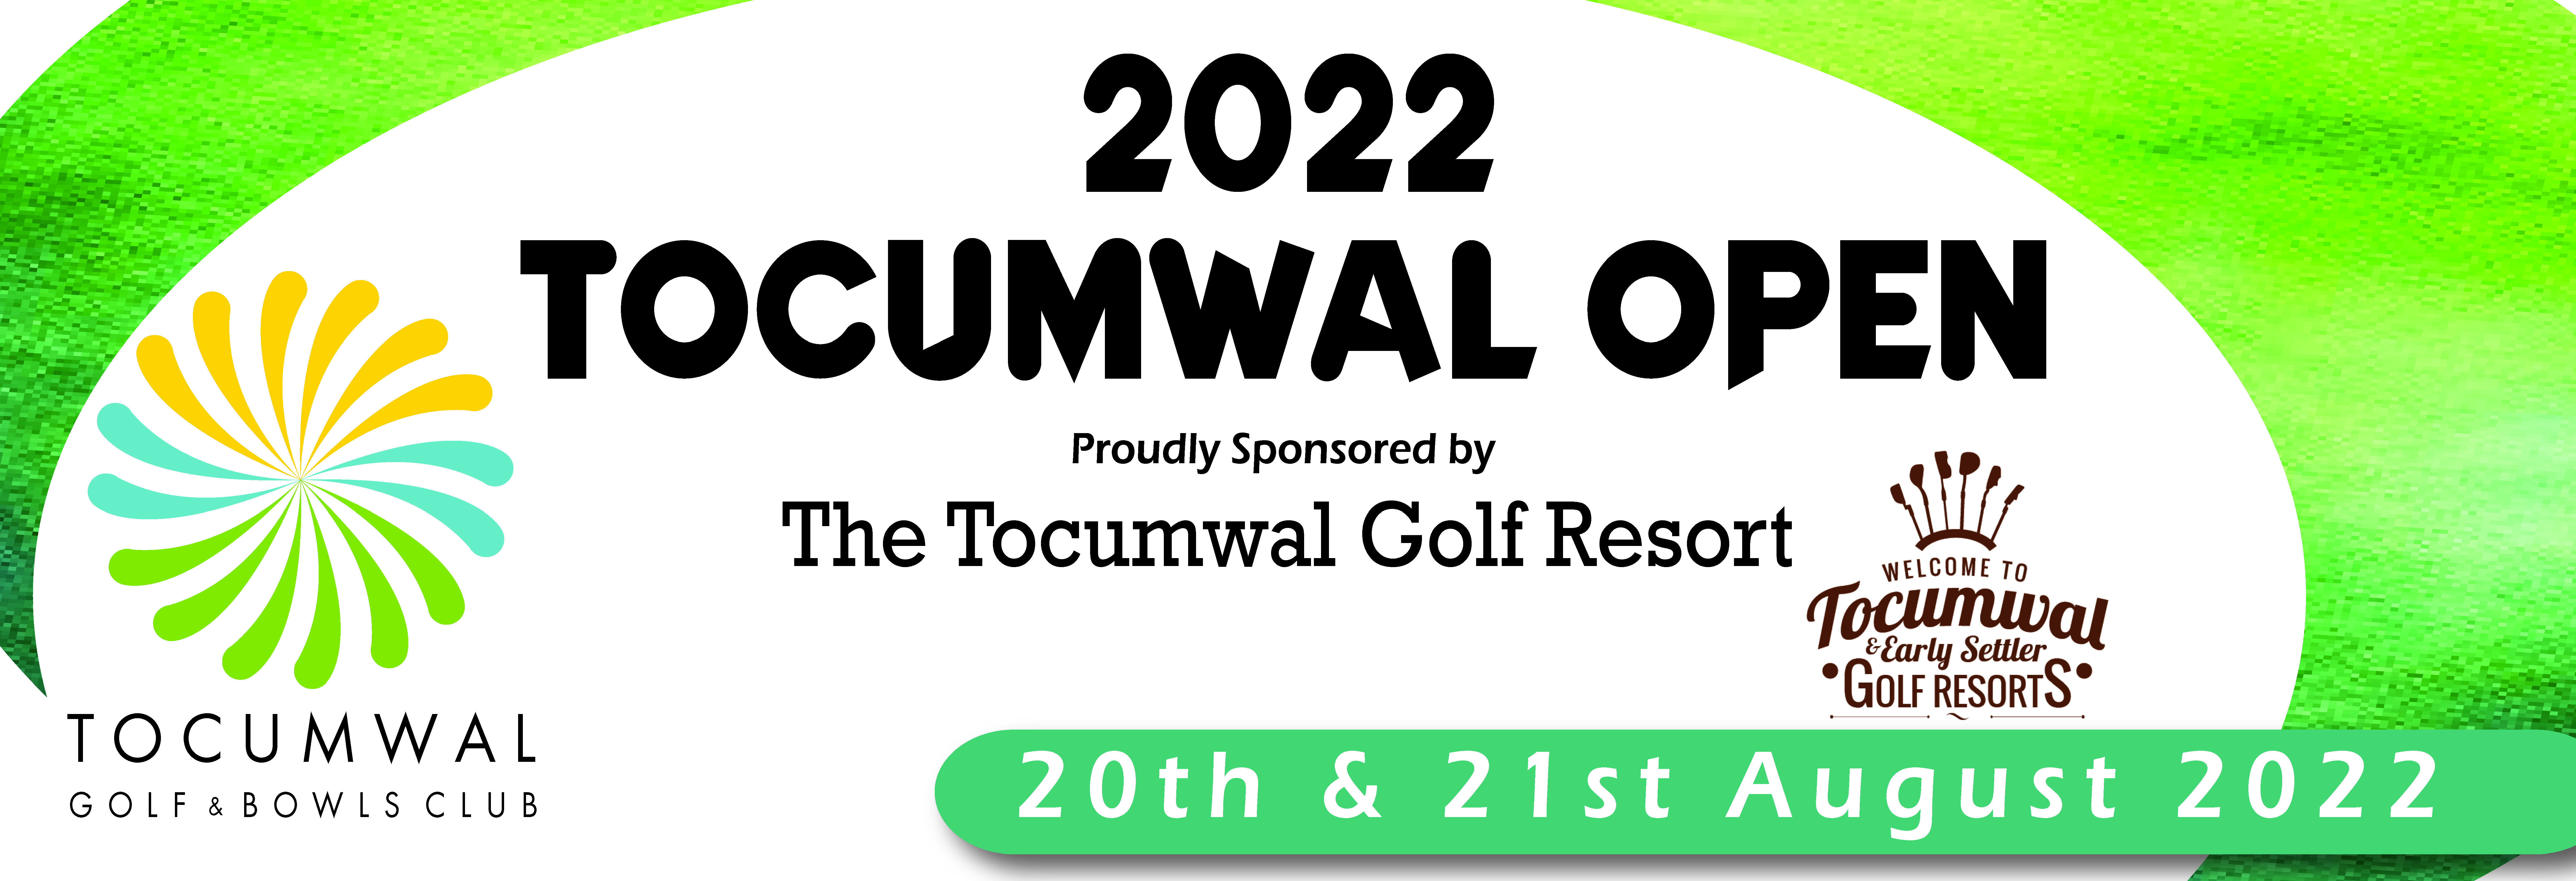 2022 Tocumwal Open BANNER